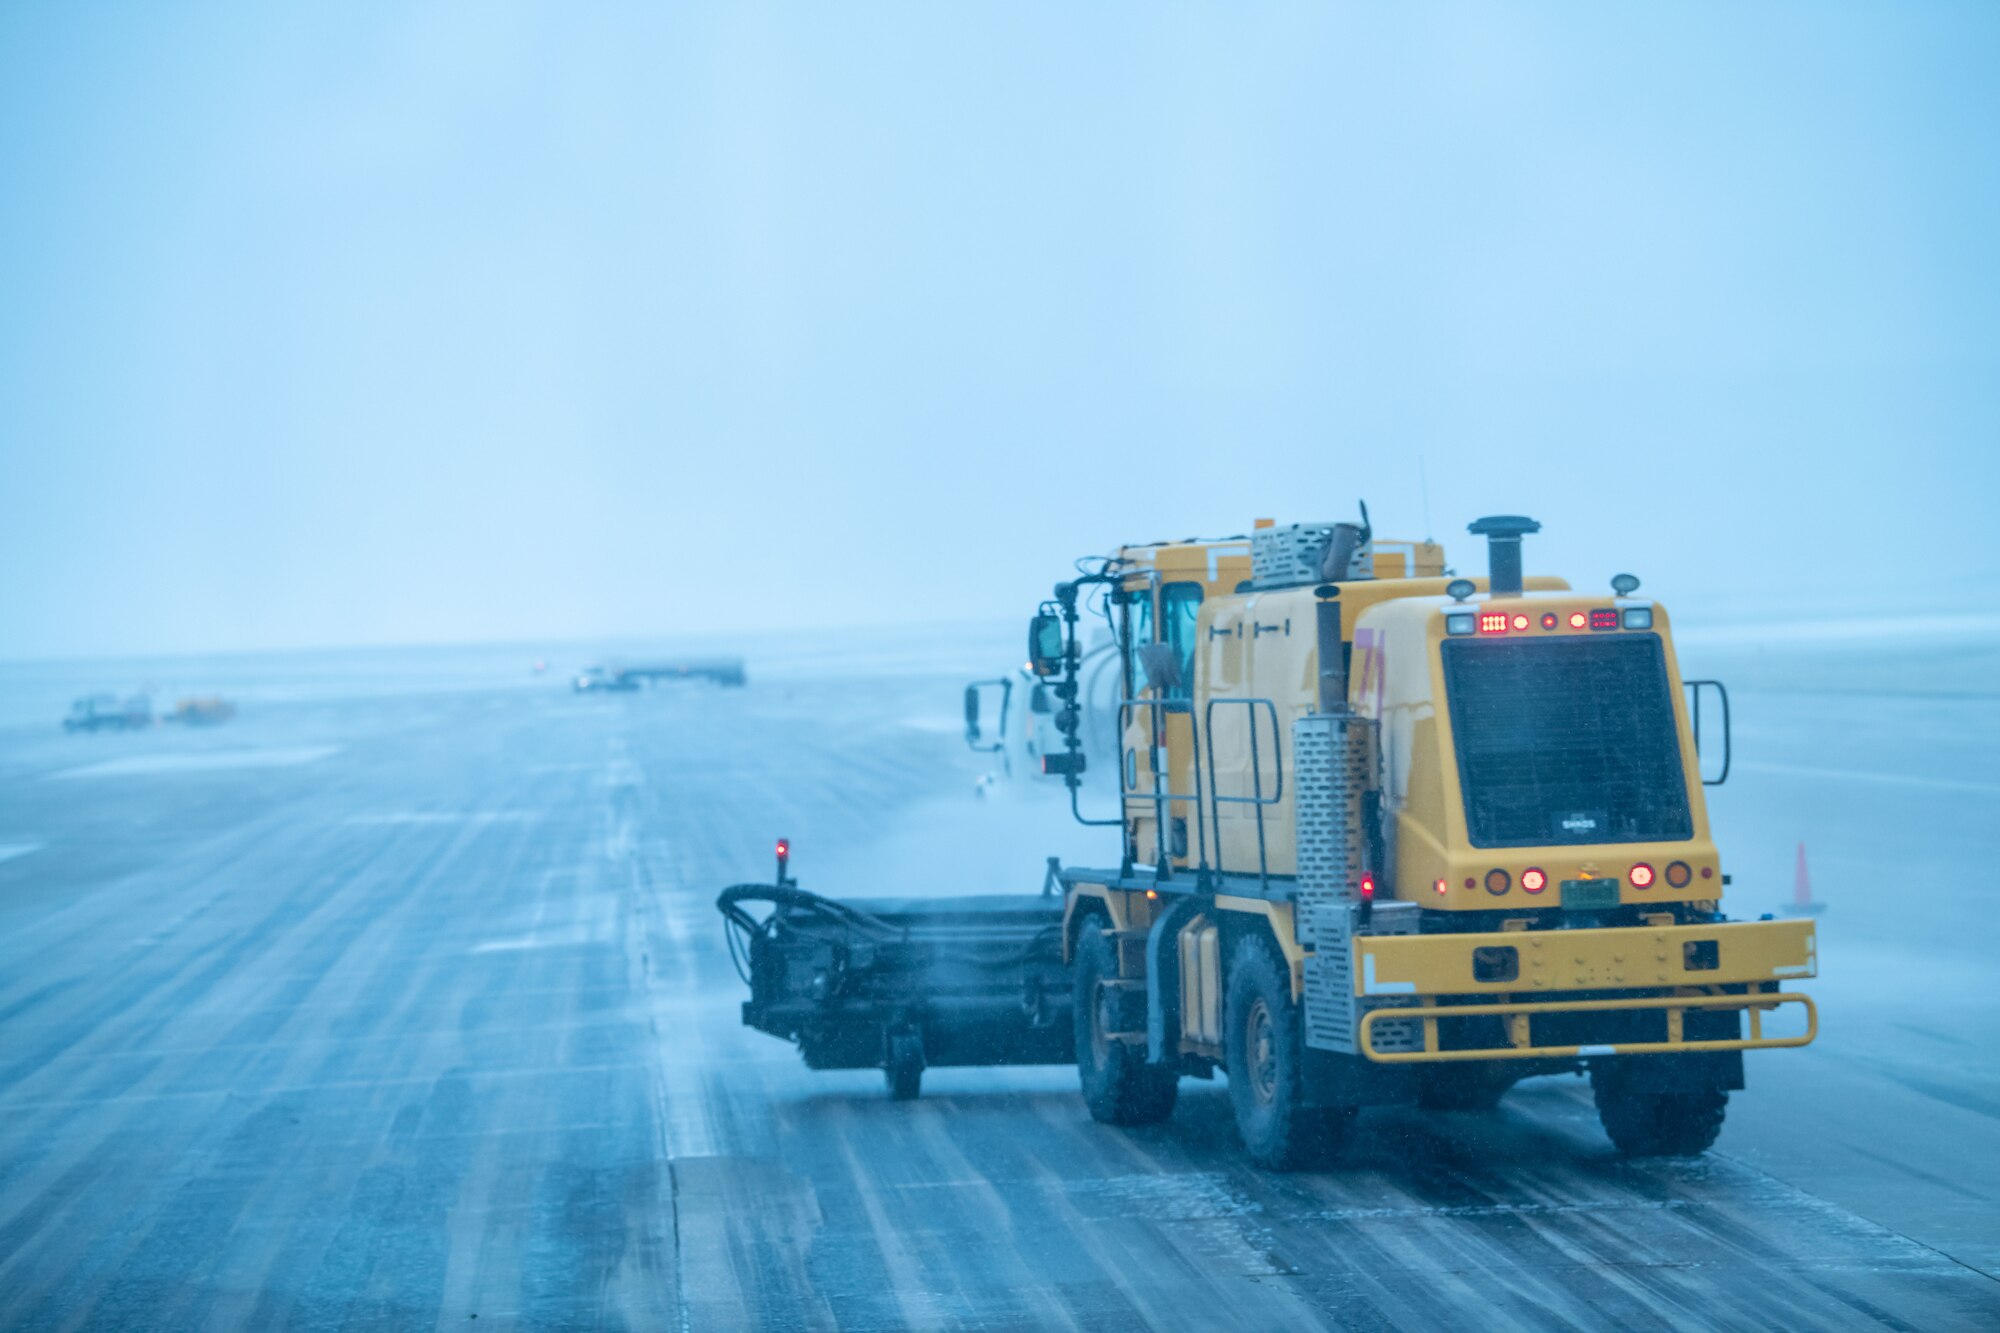 Members of the 28th Civil Engineering Squadron Dirt Boyz unit use Oshkosh H-series trucks with front-mounted sweepers to scrub rubber off the runway of Ellsworth Air Force Base, S.D., April 24, 2022. Rubber must be removed from the runway to ensure sufficient traction for aircraft as they land at Ellsworth. (U.S. Air Force photo by Airman 1st Class Adam Olson)